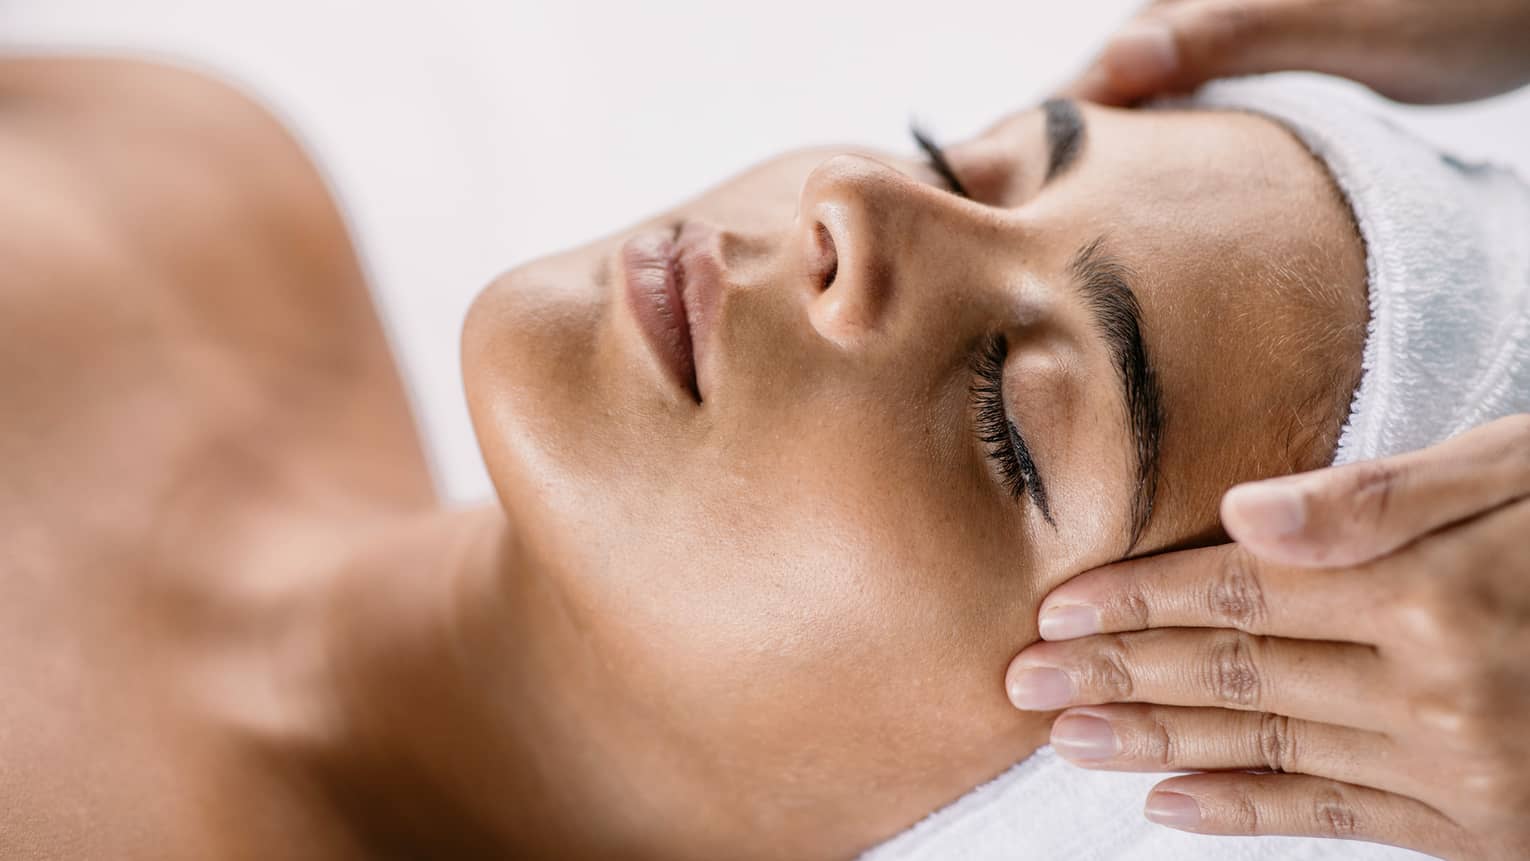 Hands massage woman's temples as she closes her eyes, spa towel around hair